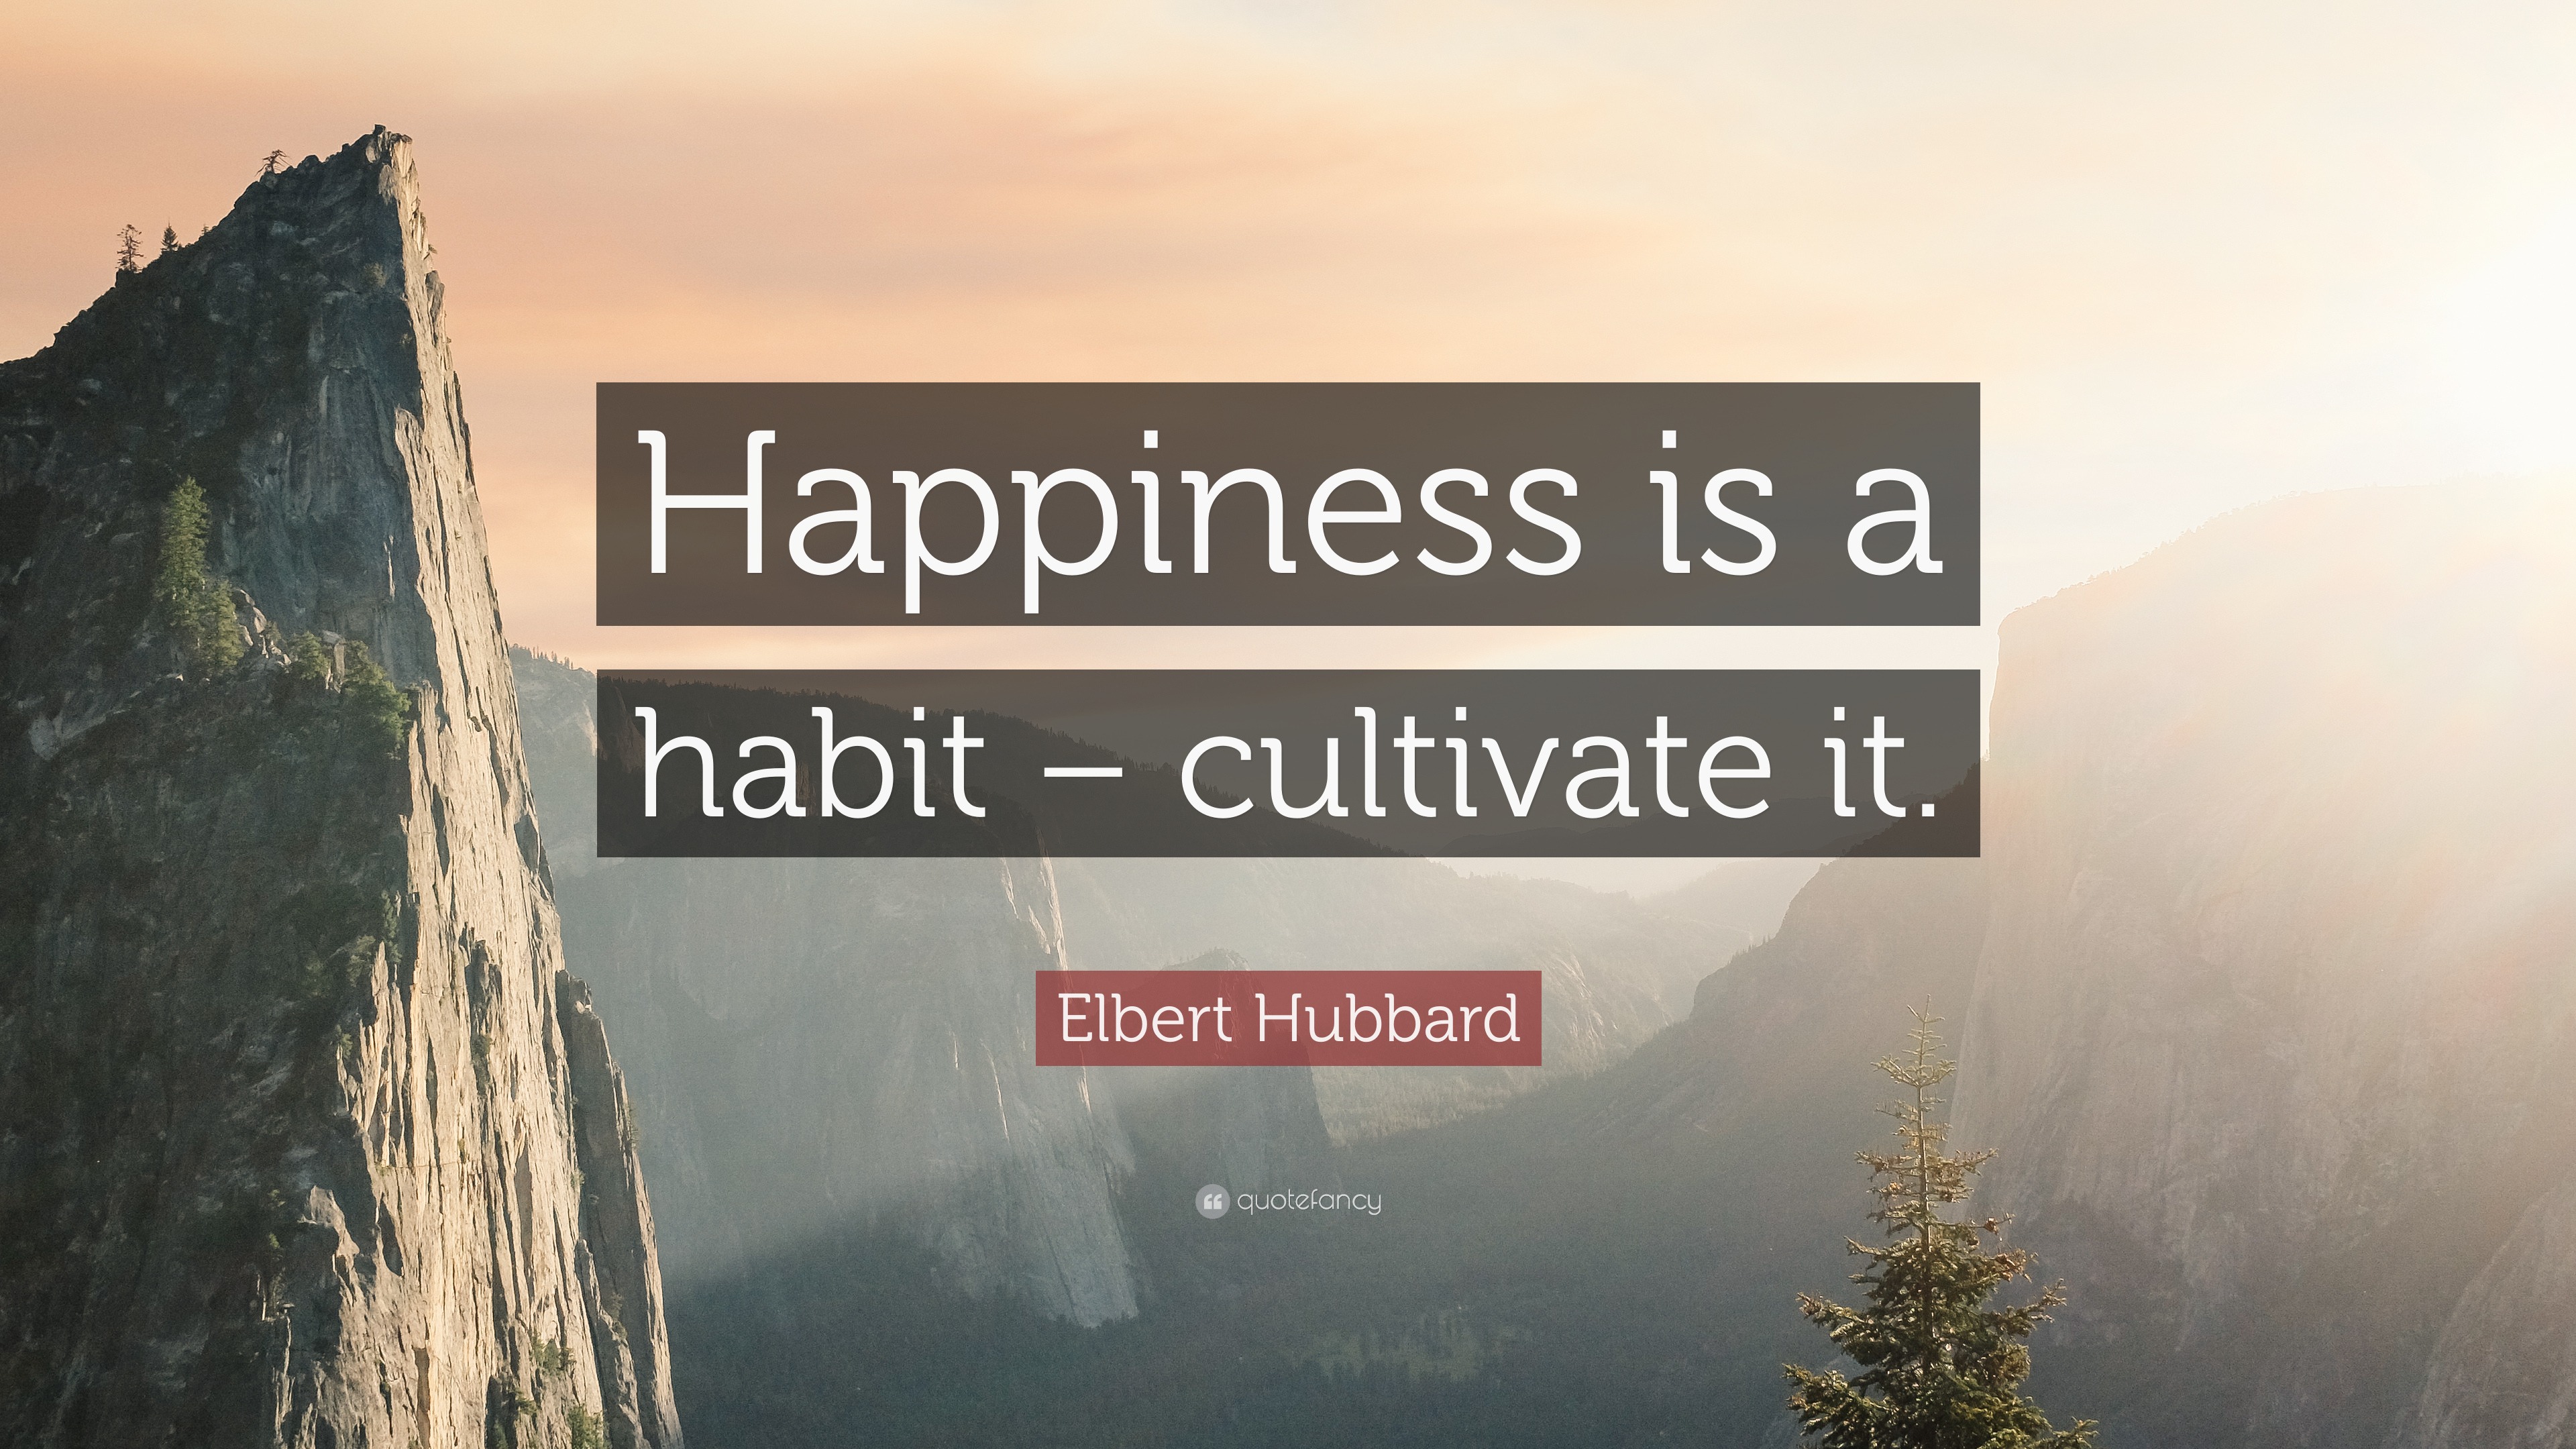 Elbert Hubbard Quote: “Happiness is a habit – cultivate it.”